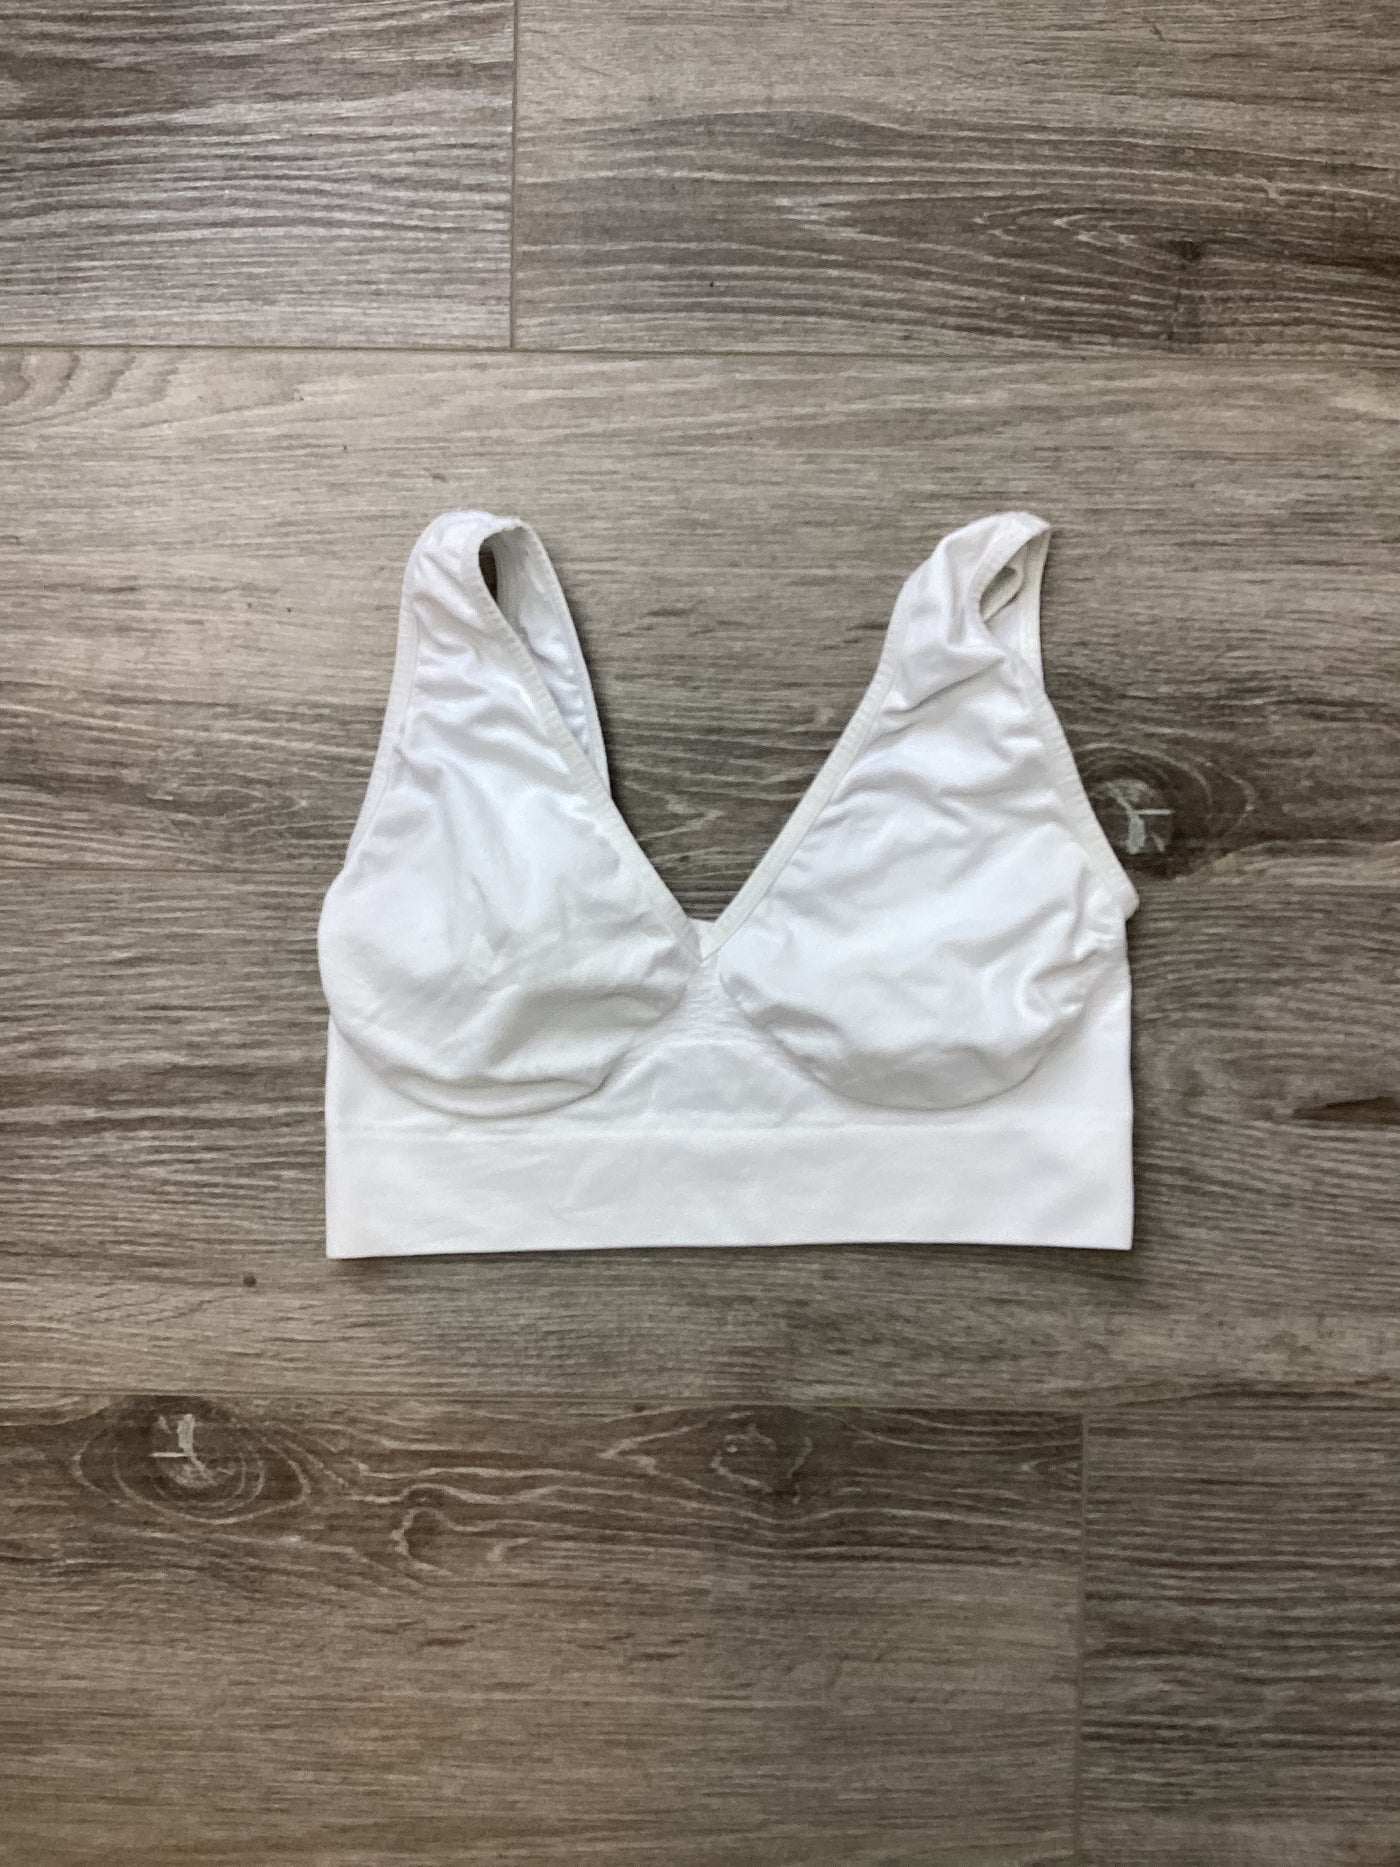 Asos Maternity white seamless crop top maternity bra - Size S (Approx UK 8/10)